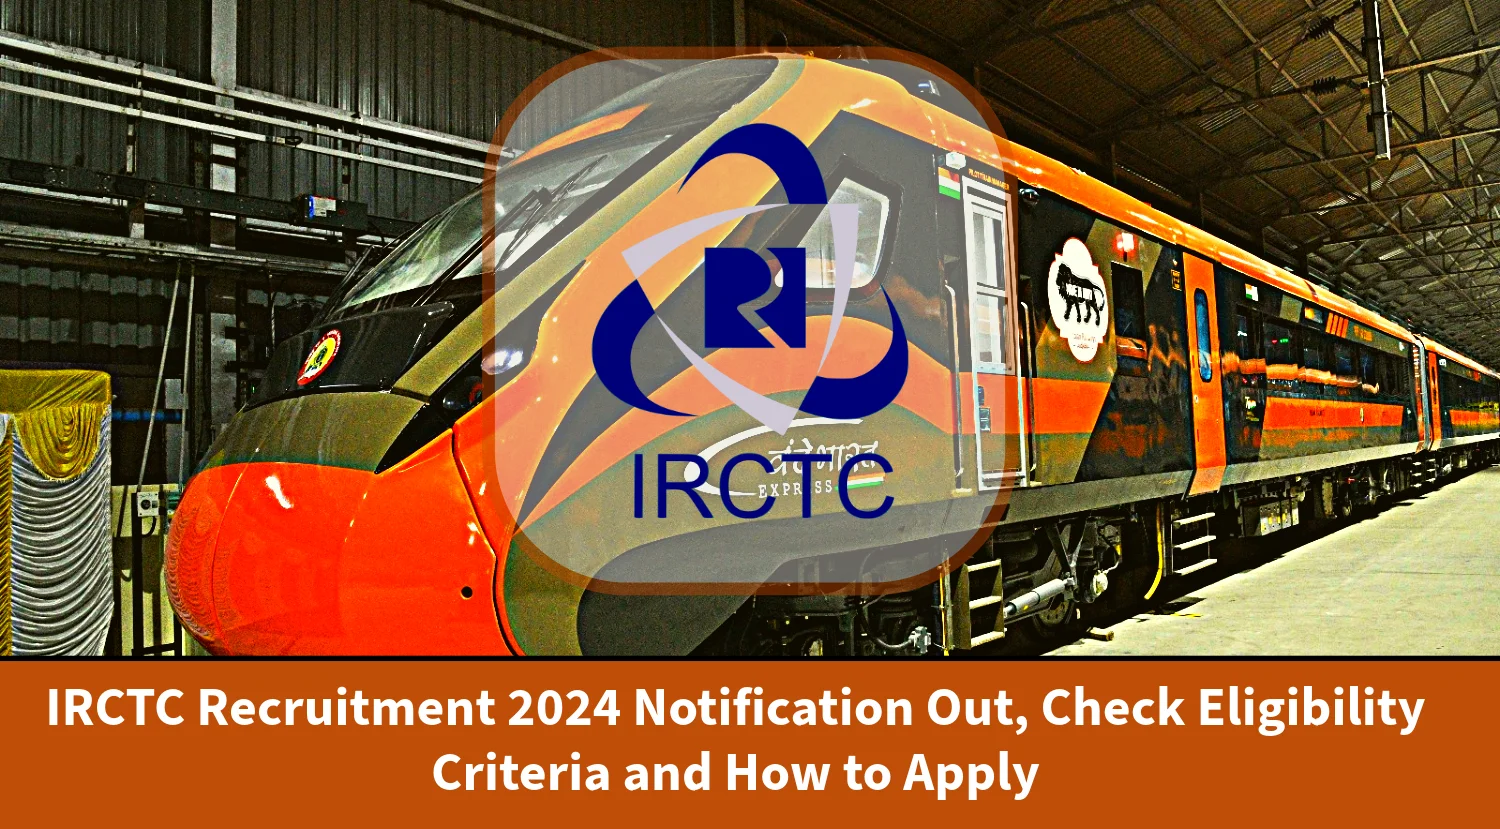 IRCTC Recruitment 2024 Notification Out, Check Eligibility Criteria and How to Apply